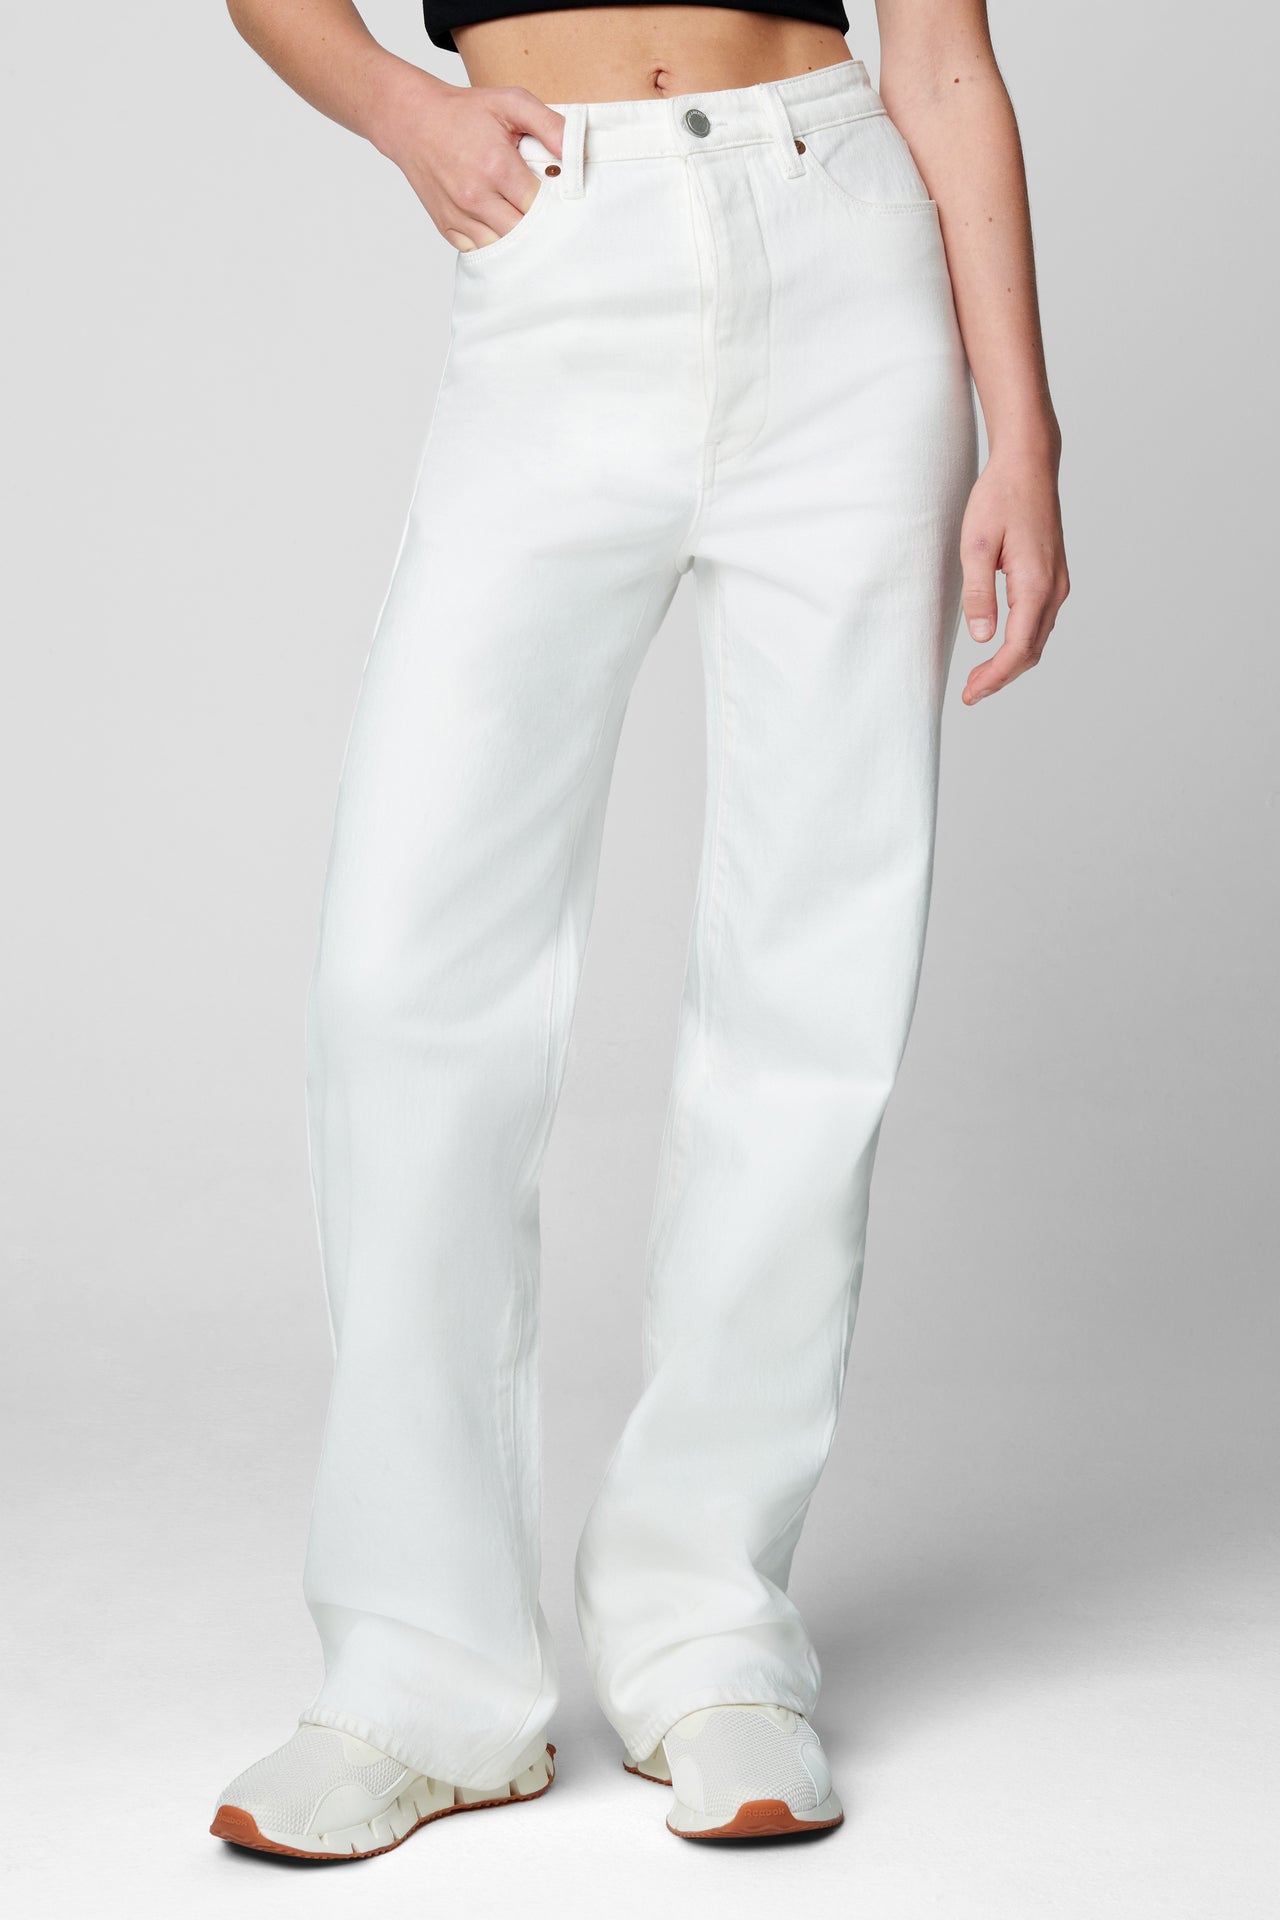 See You Again Straight Leg White, Bootcut Denim by Blank NYC | LIT Boutique